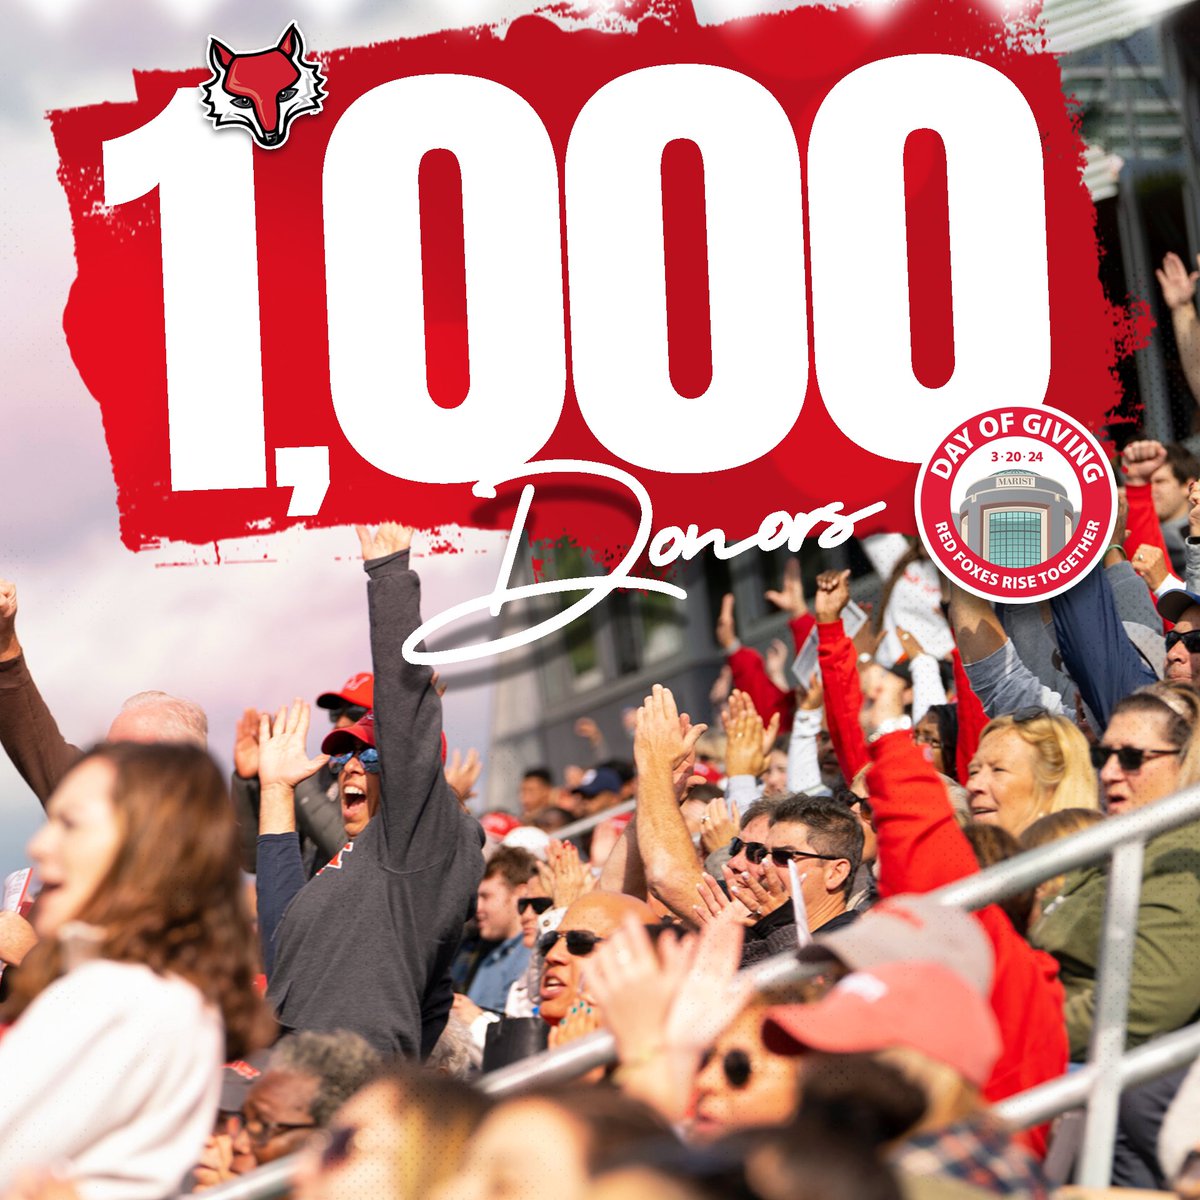 1️⃣0️⃣0️⃣0️⃣‼️ We’ve hit the 1k mark on athletic donors and we’re still going! Let’s get to 2,000 by midnight. Give ➜ givecampus.com/ncw86i #RedFoxesRiseTogether